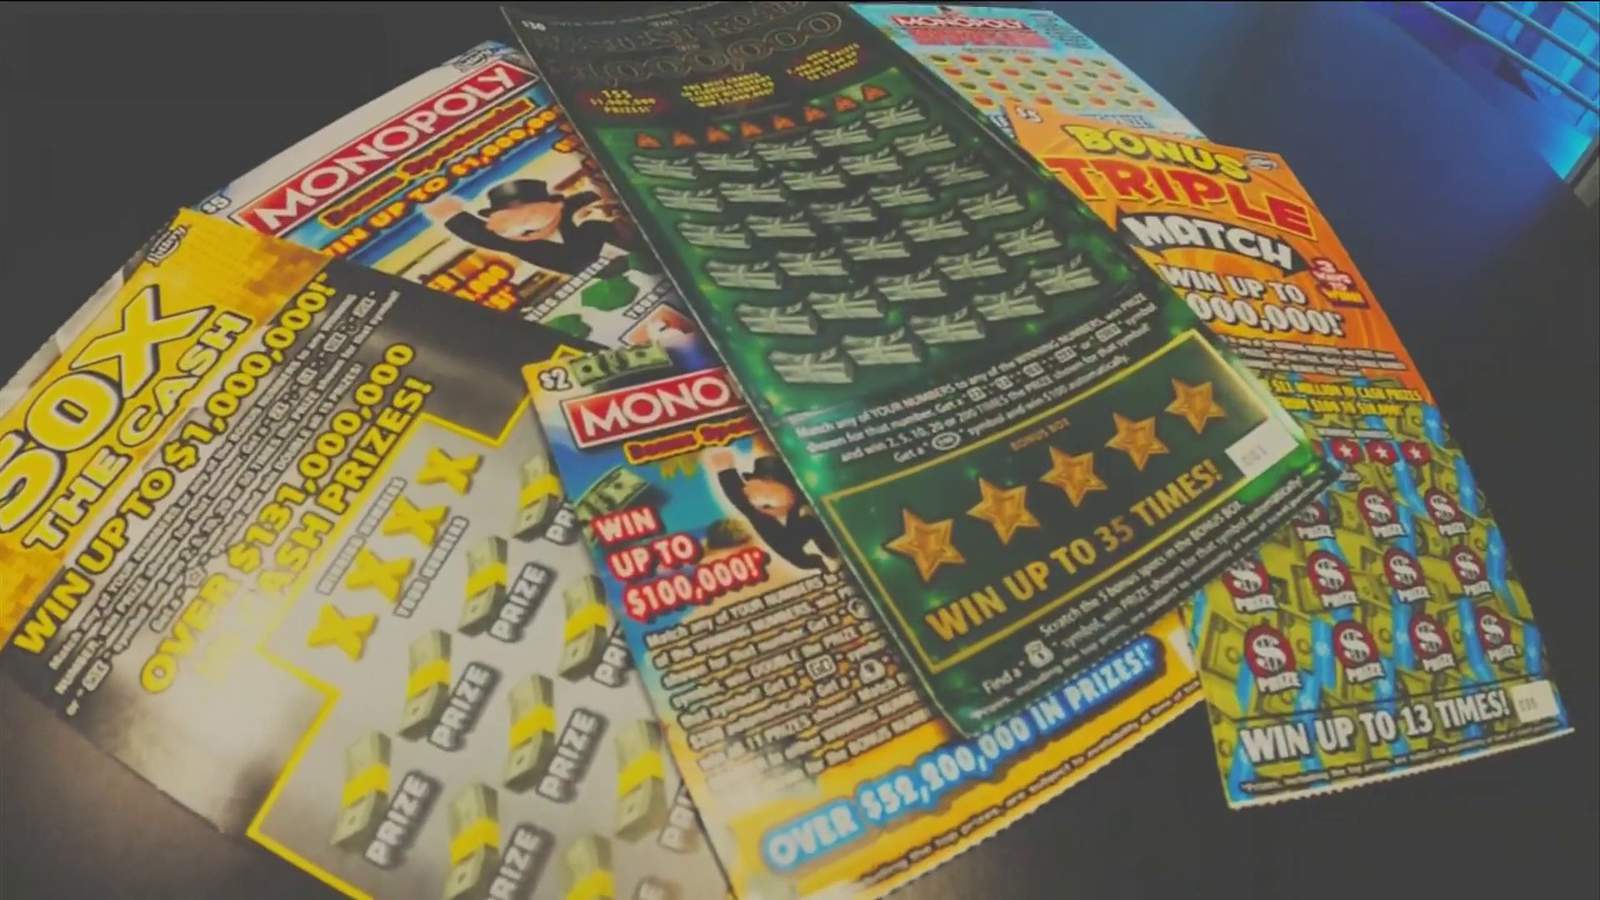 Florida father wins $2 million from $10 scratch-off ticket